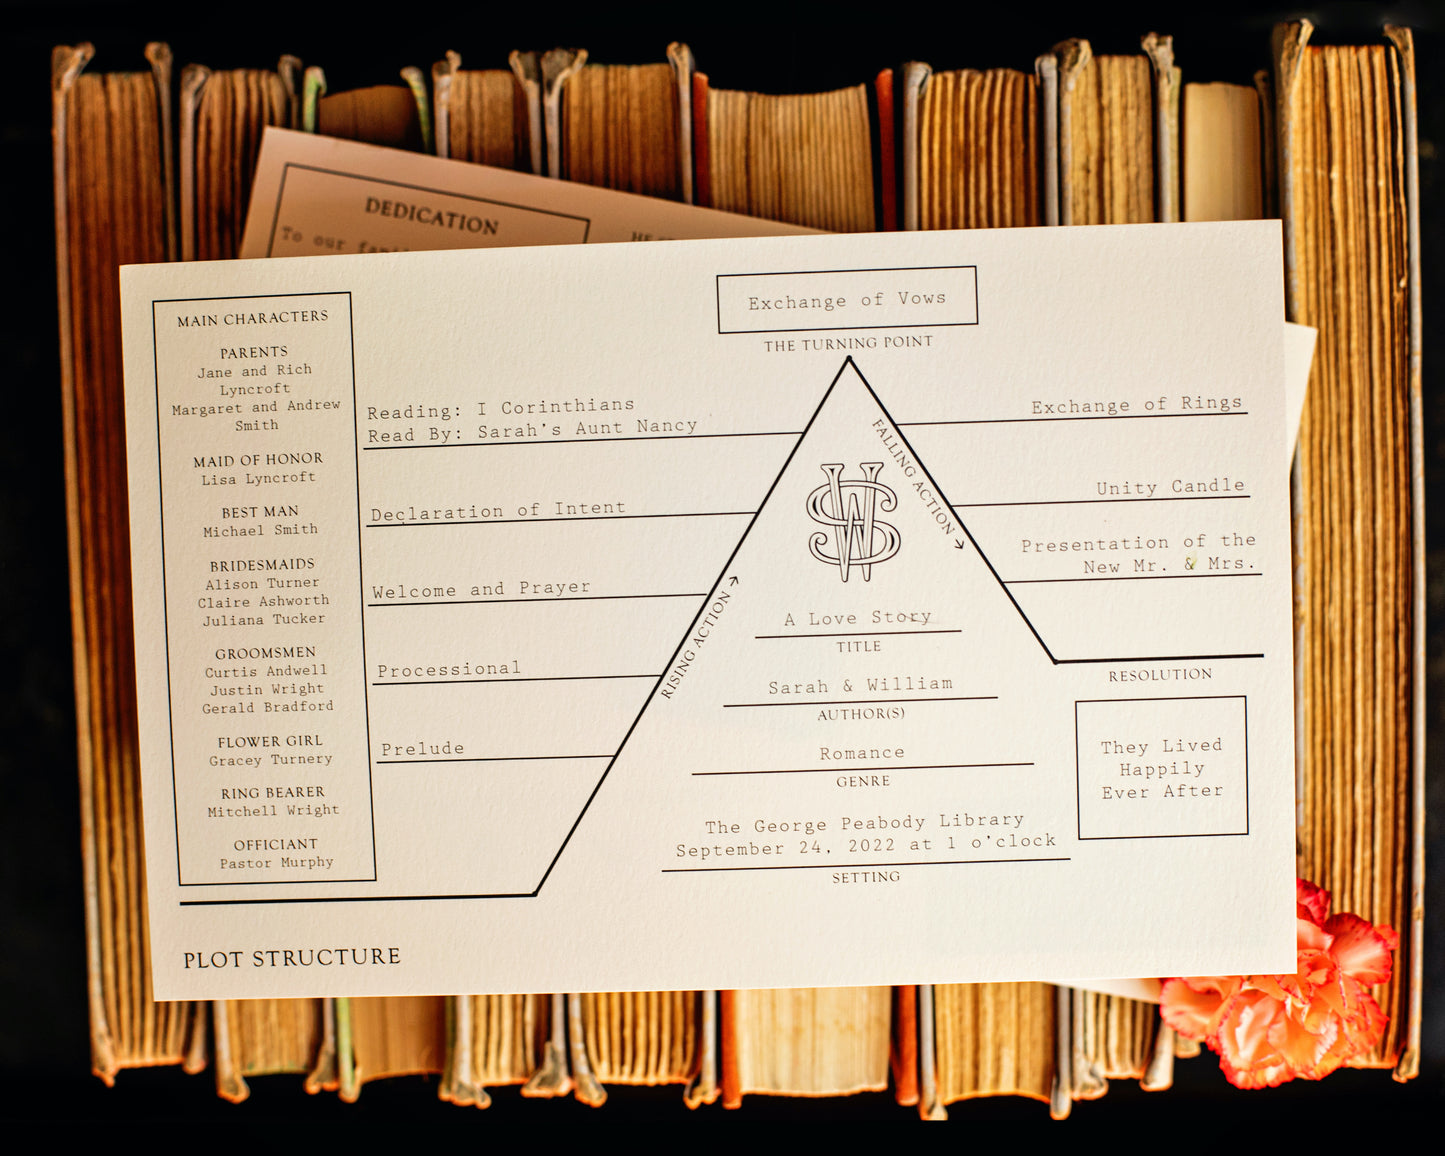 Book themed wedding program designed to look like a plot structure